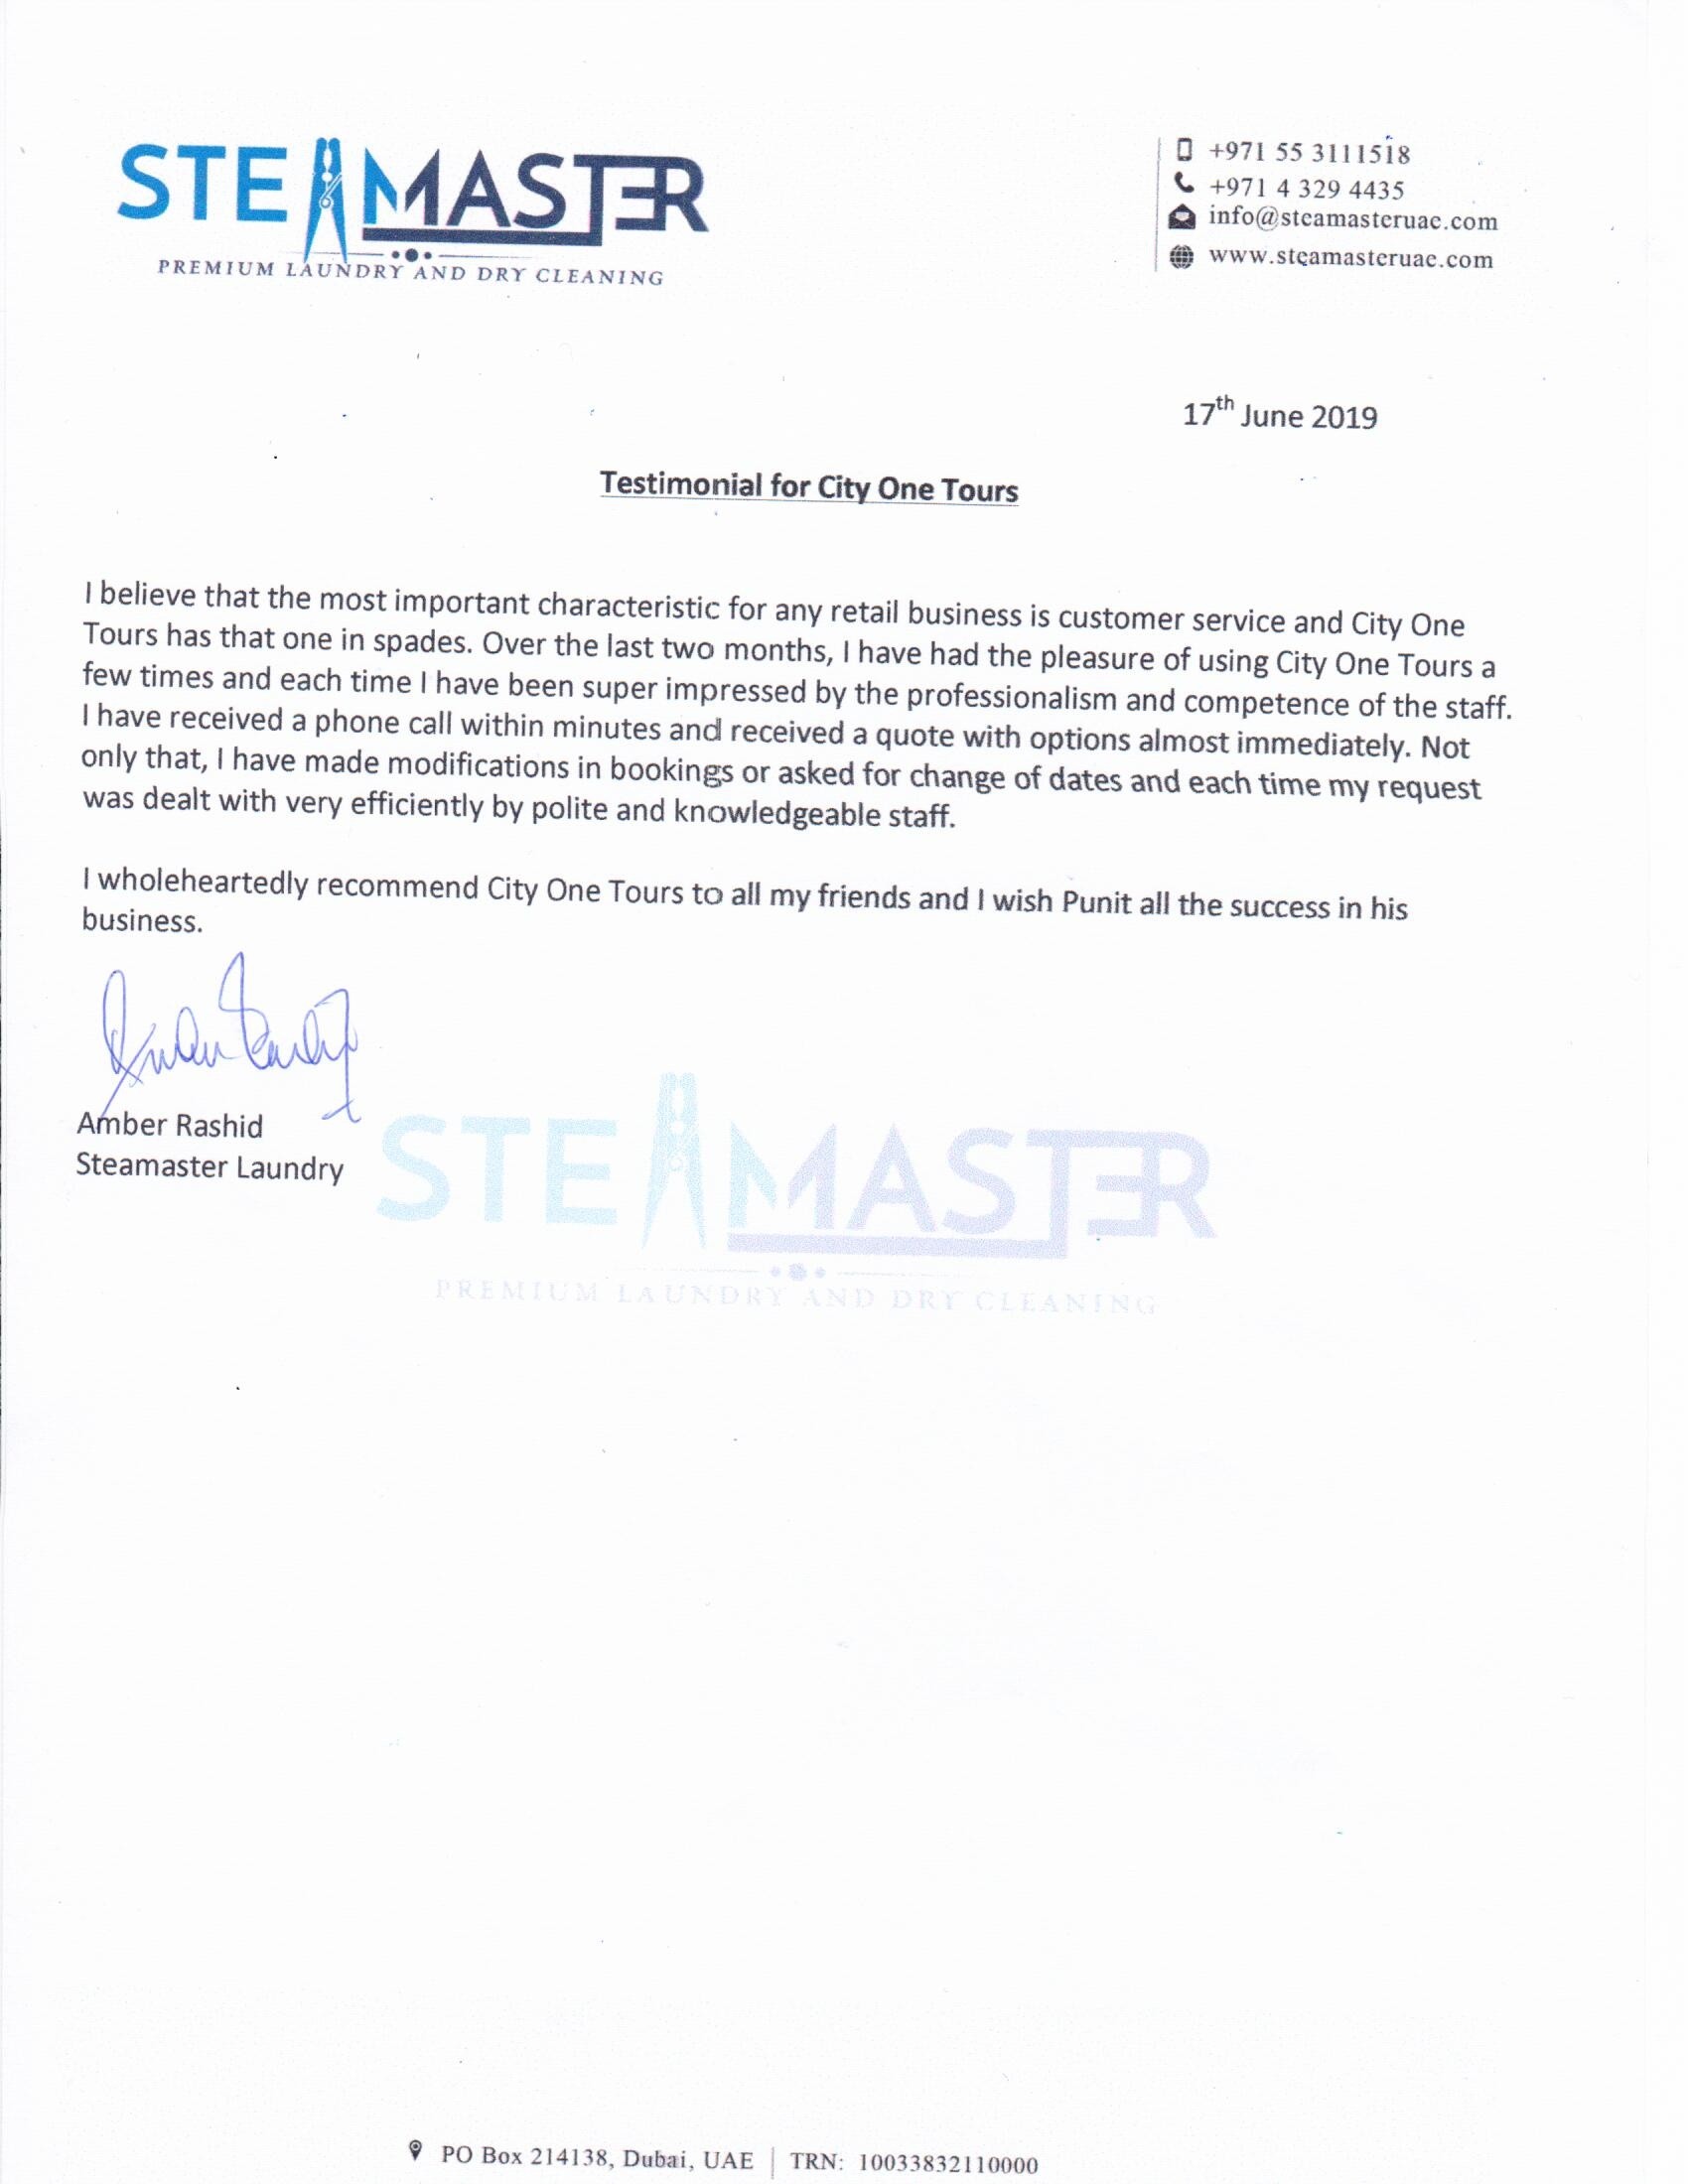 Steamaster Premium Laundry and Dry Cleaning